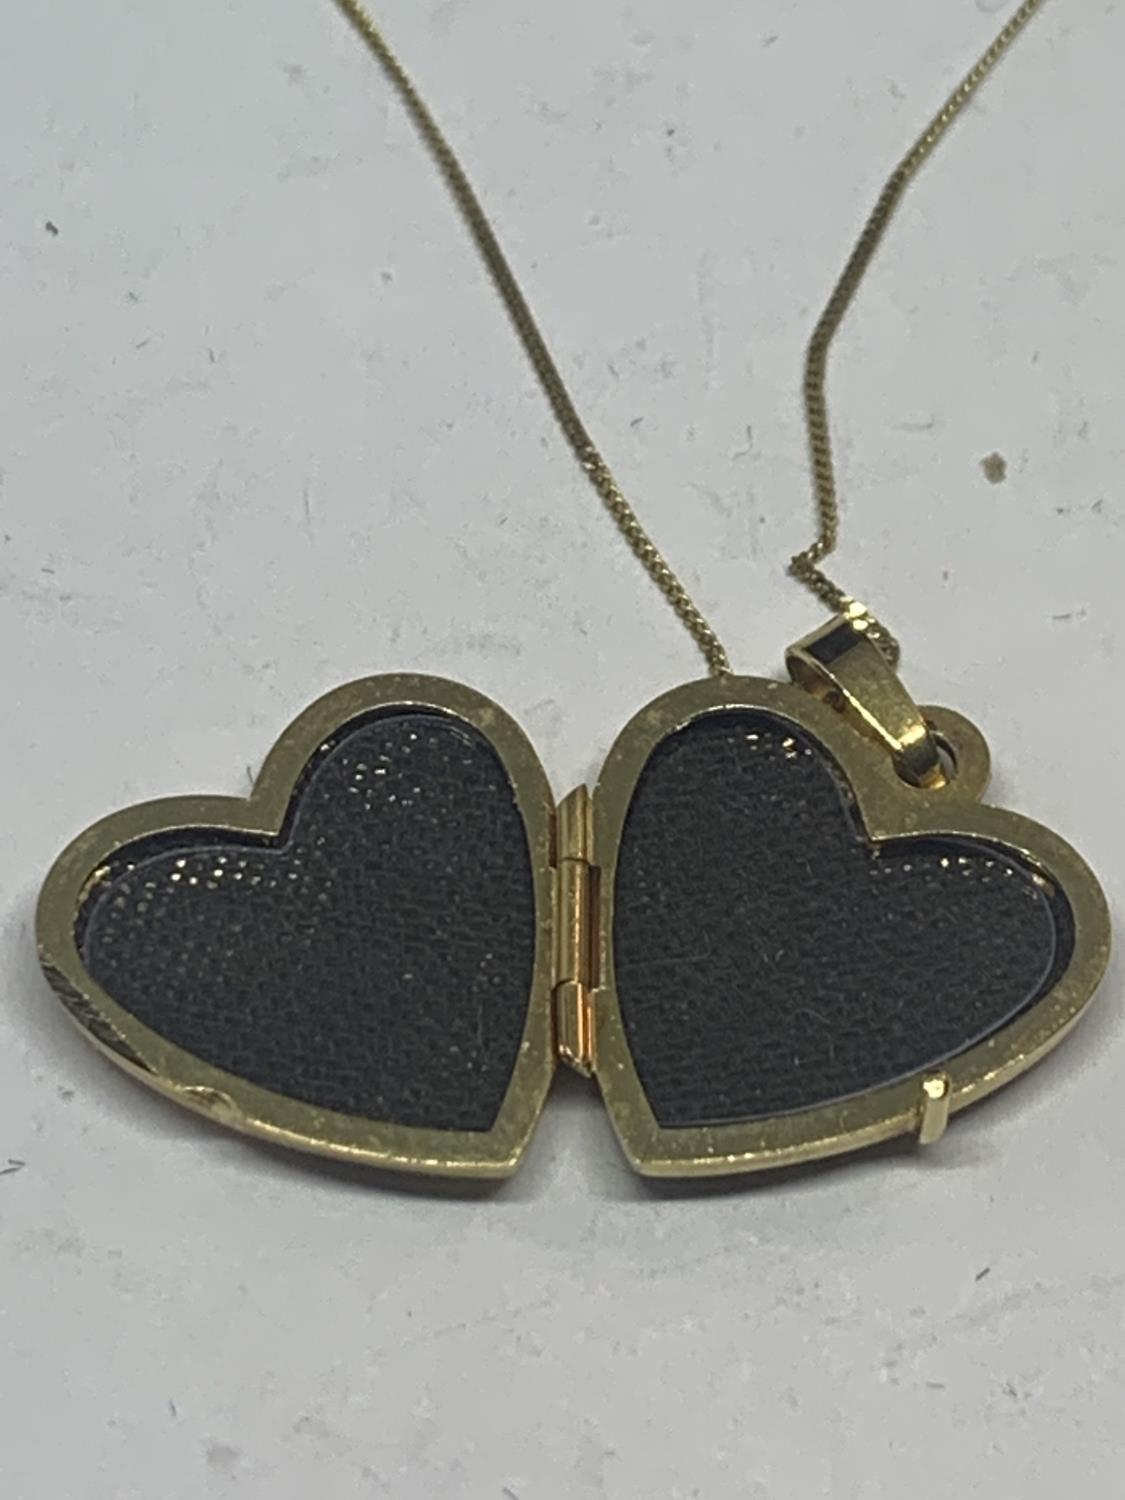 A 9 CARAT GOLD NECKLACE WITH HEART SHAPED LOCKET IN A PRESENTATION BOX - Image 3 of 5